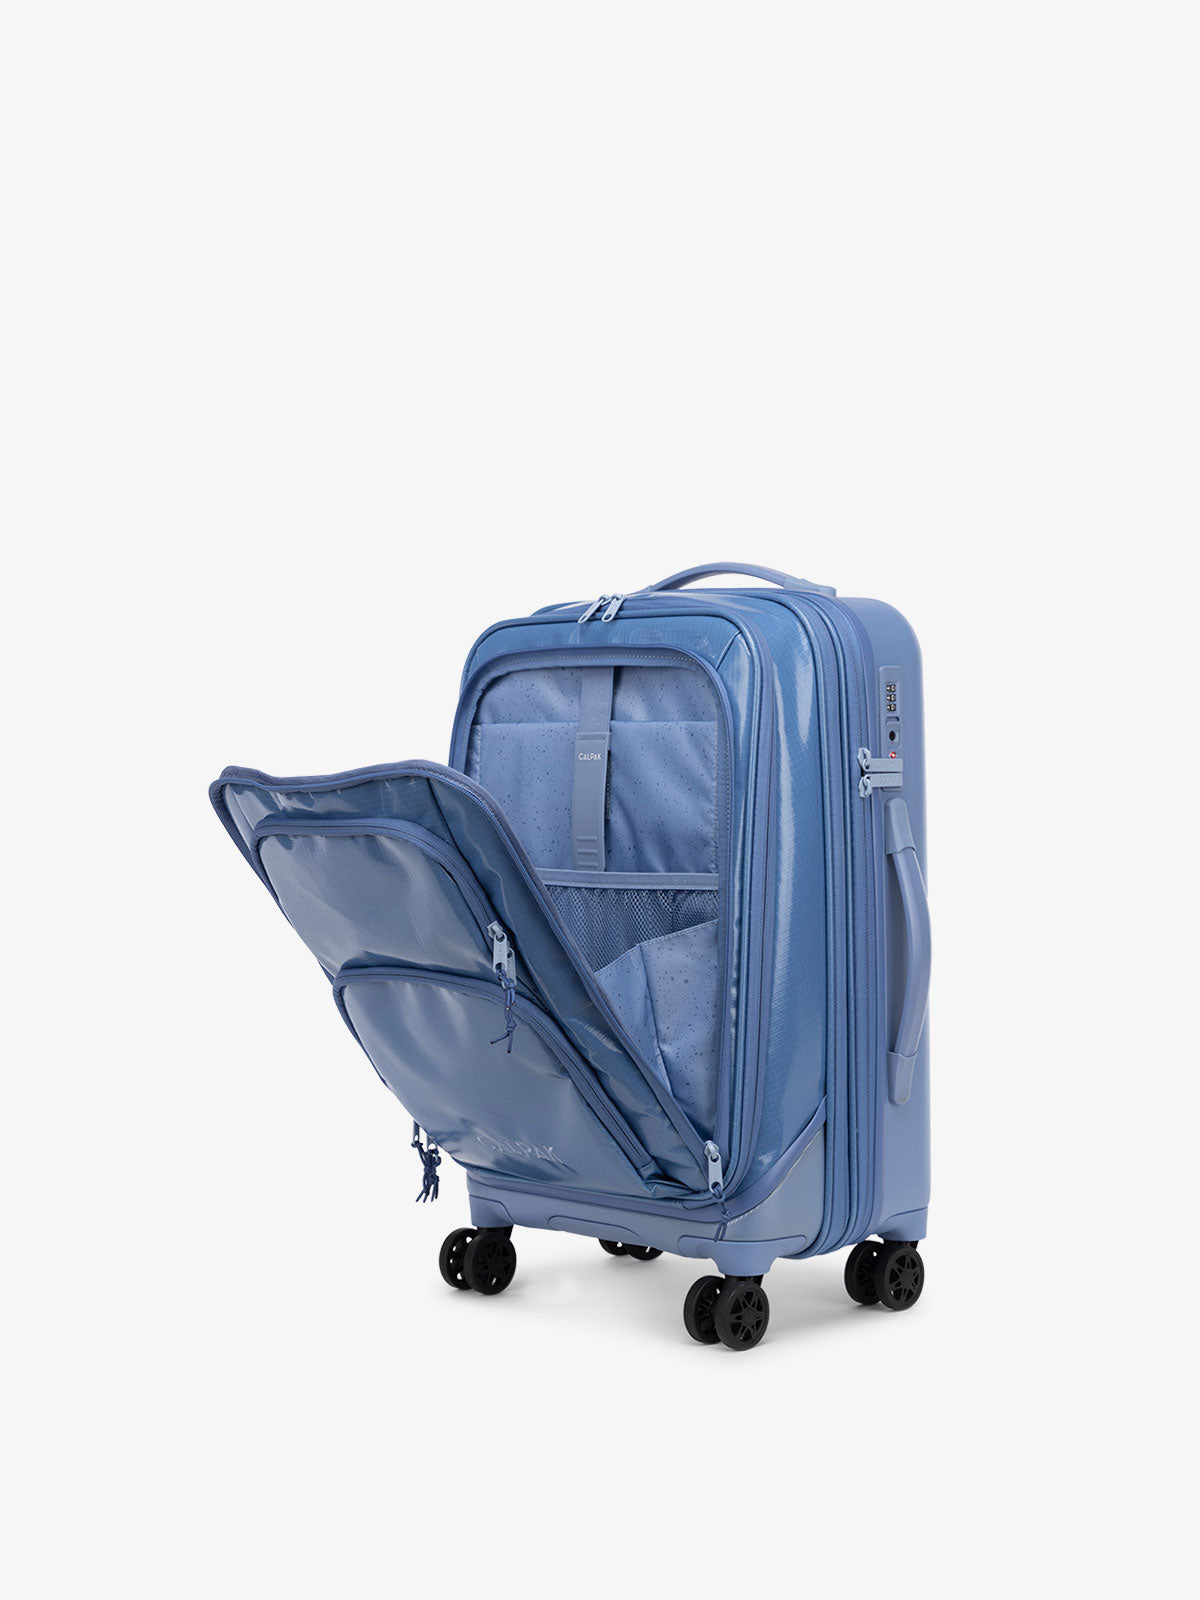 CALPAK Terra Carry-On expandable Luggage with padded laptop compartment in glacier